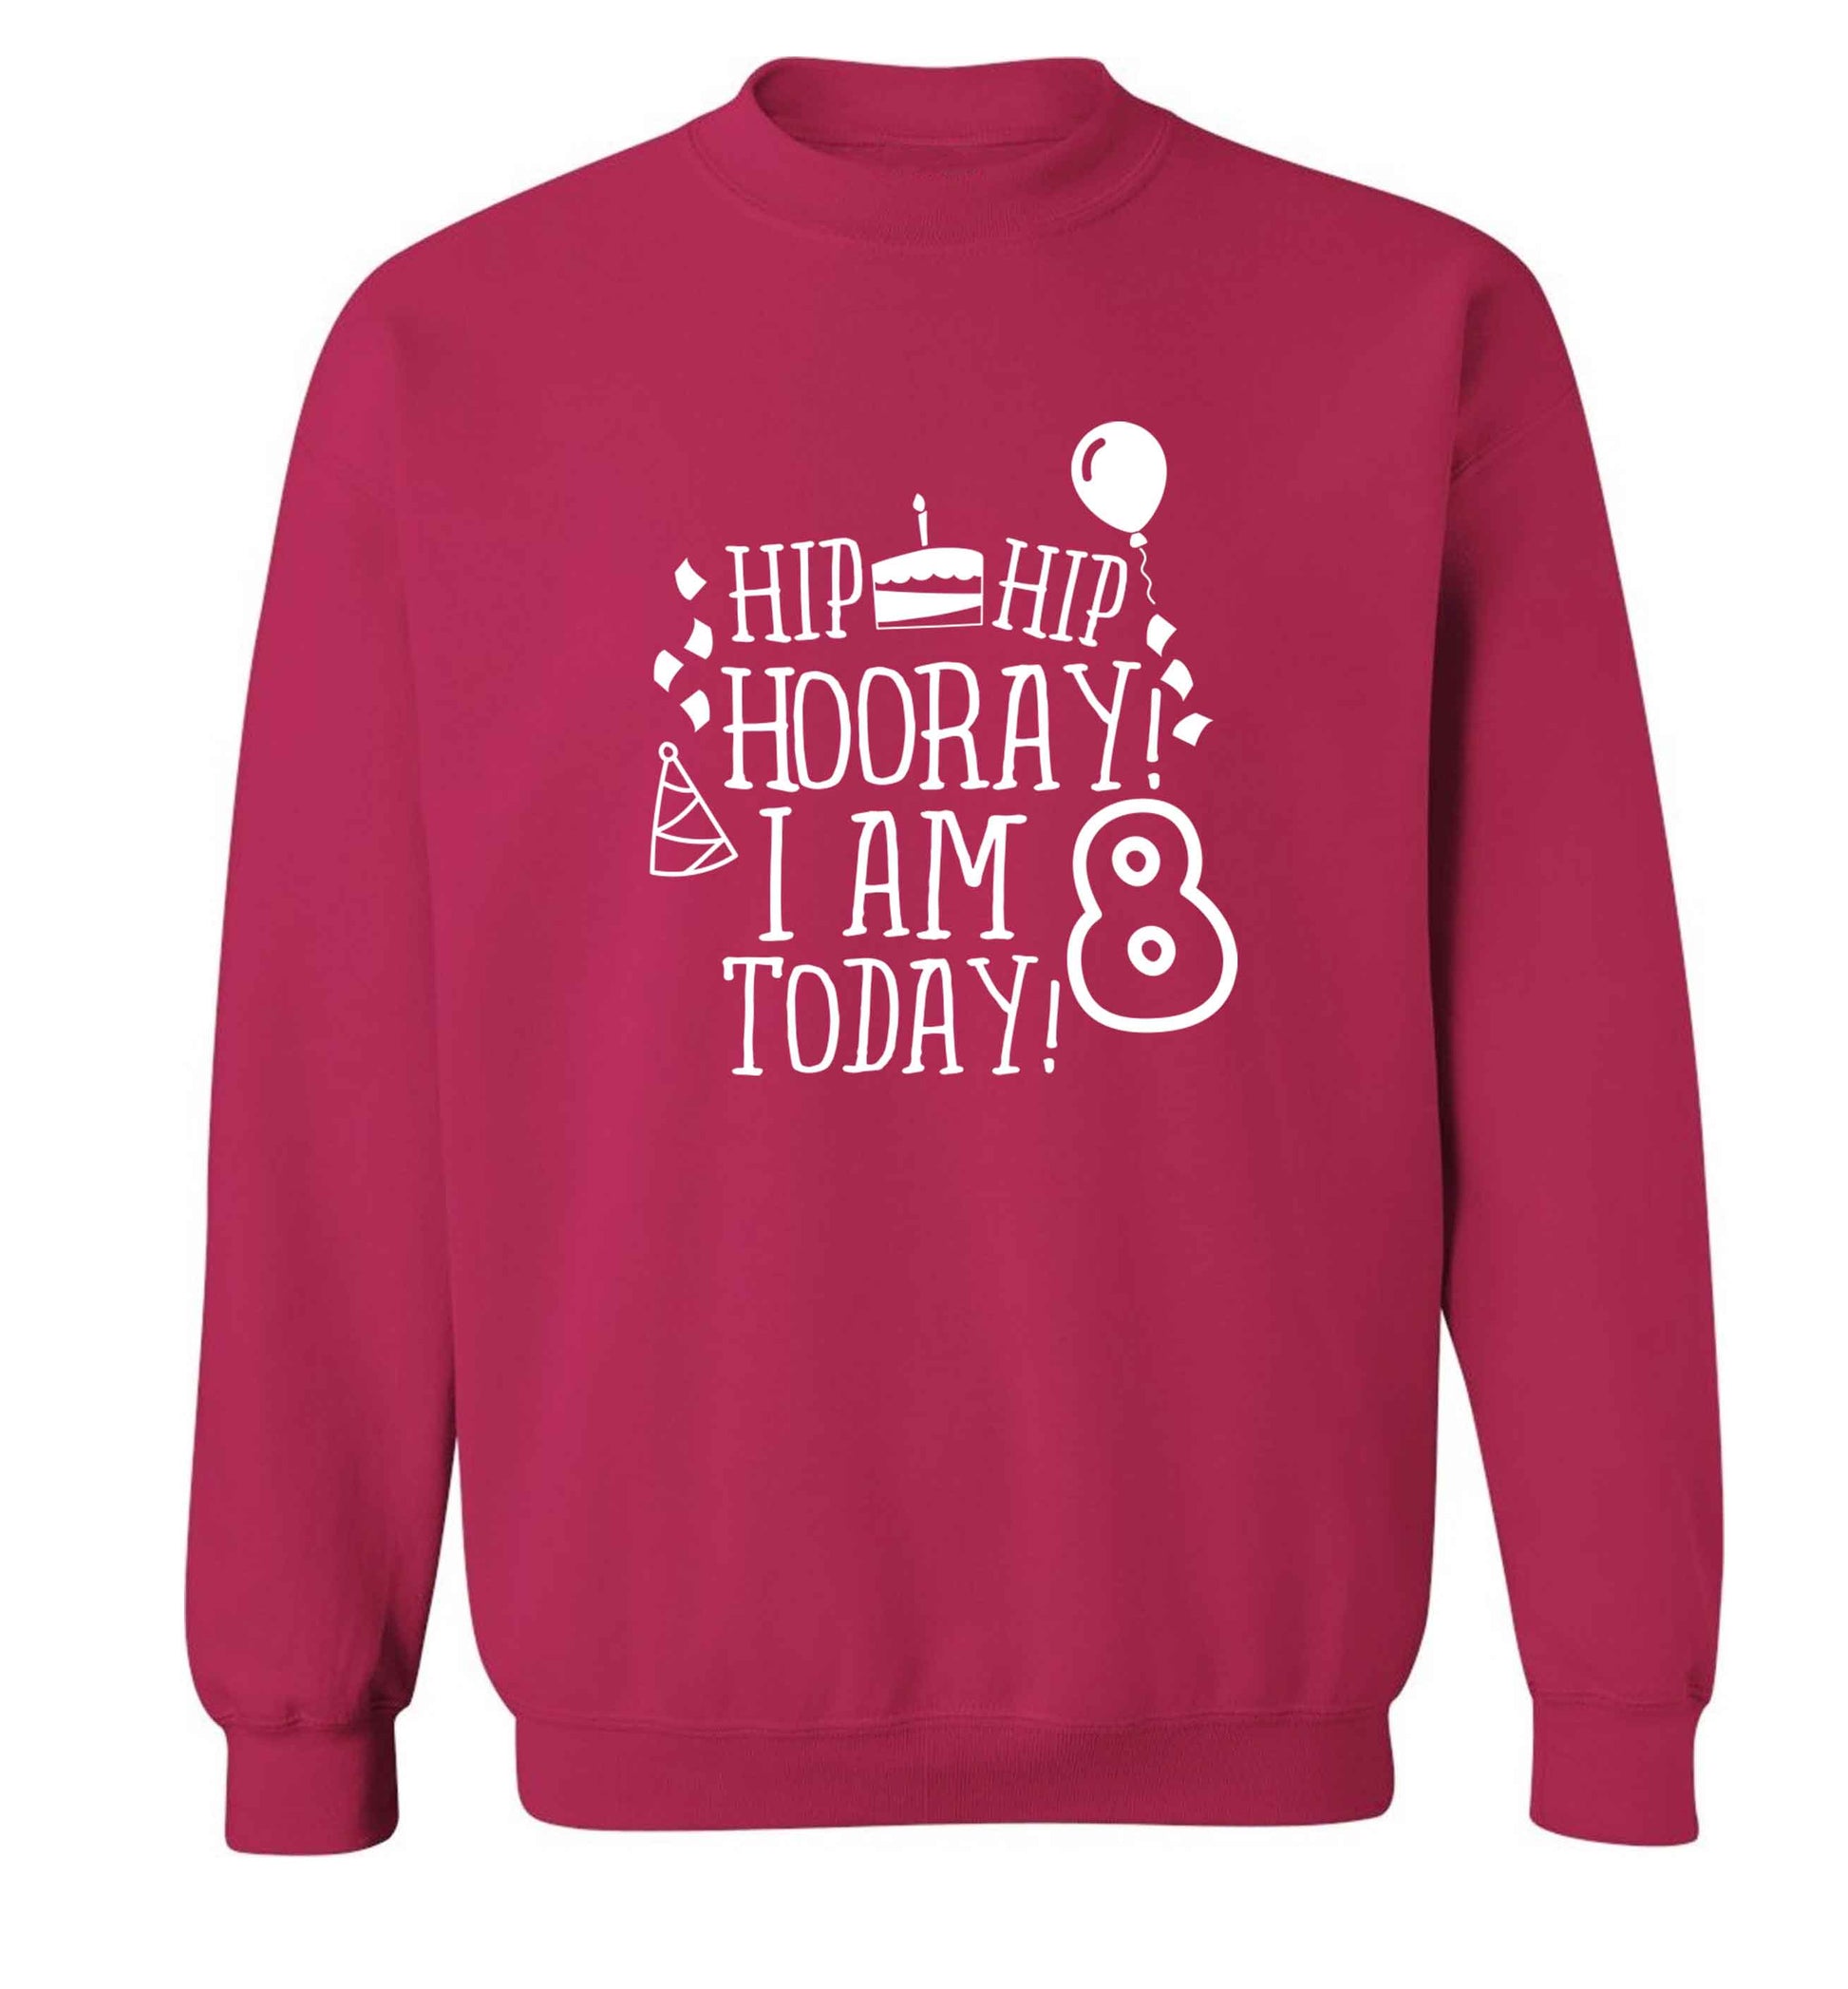 Hip hip hooray I am 8 today! adult's unisex pink sweater 2XL